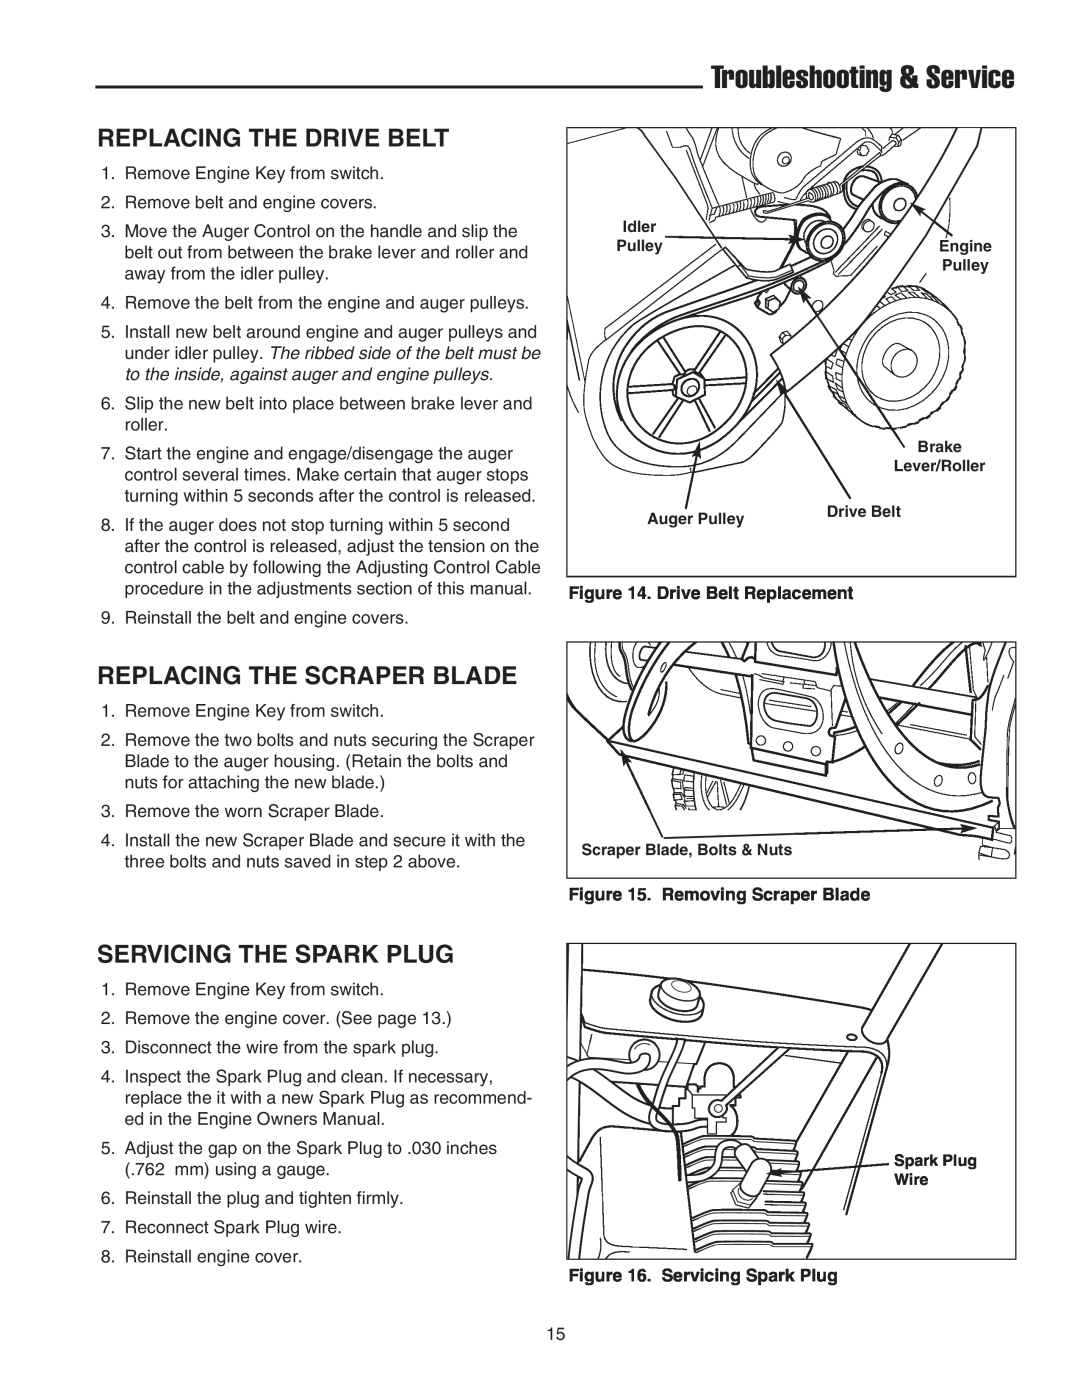 Simplicity 1692978 Replacing The Drive Belt, Replacing The Scraper Blade, Servicing The Spark Plug, Drive Belt Replacement 